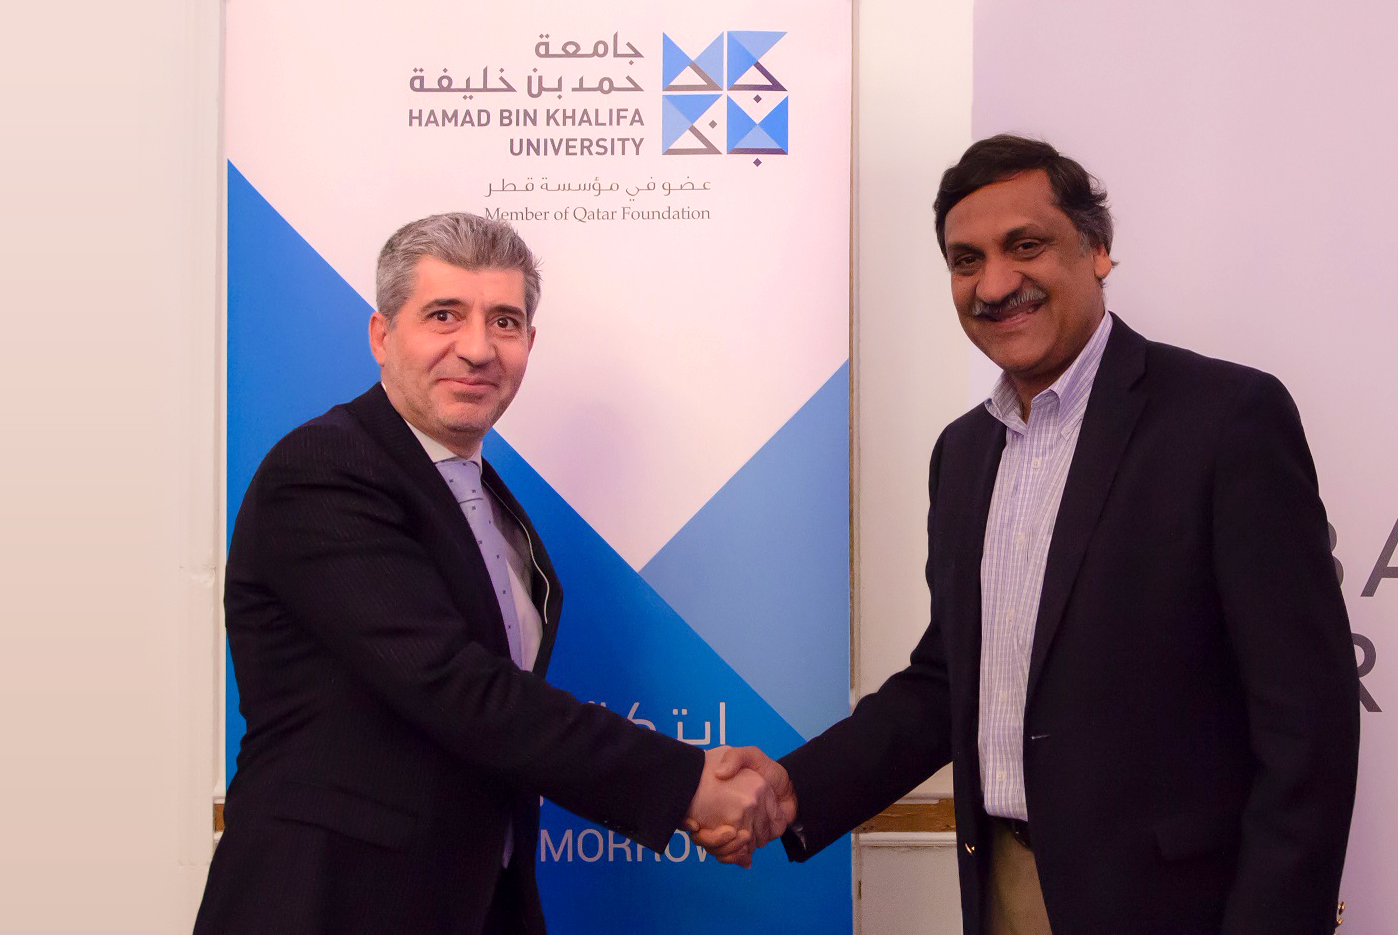 HBKU Becomes First University in the Middle East Region to Partner with edX.org and Offer Online Courses